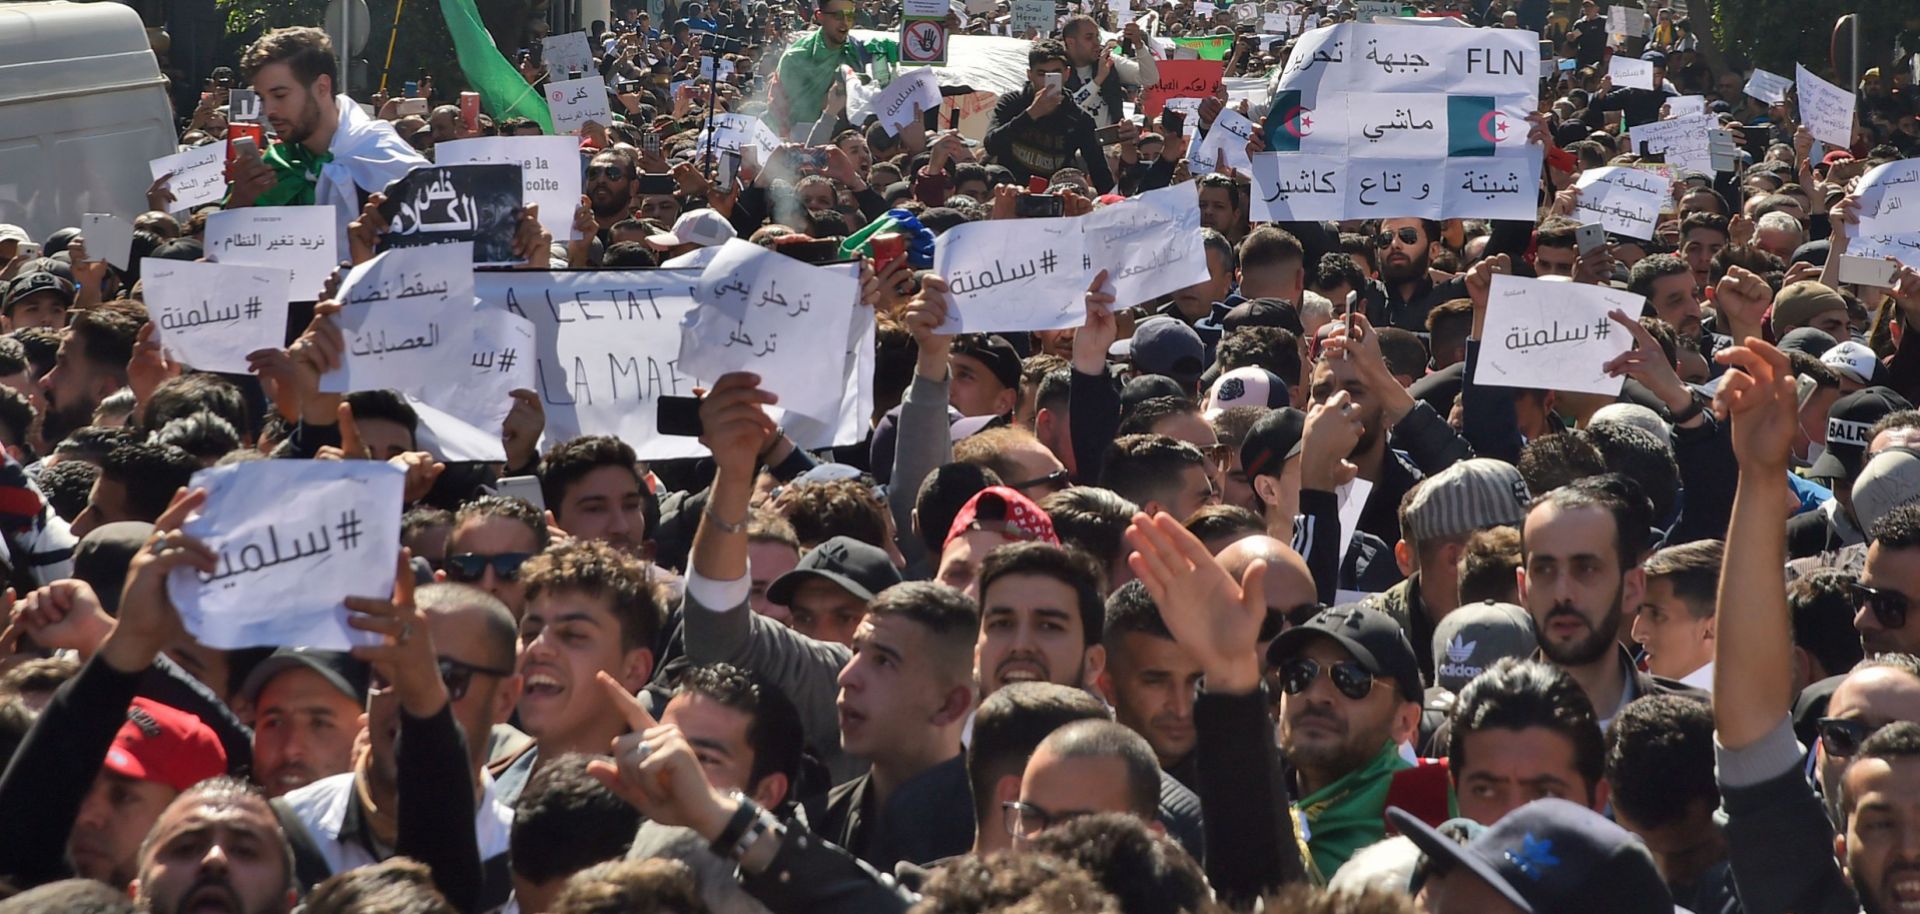 Algerians march in Algiers on March 1, 2019, against President Abdel Aziz Bouteflika's plan to run for a fifth term in April.